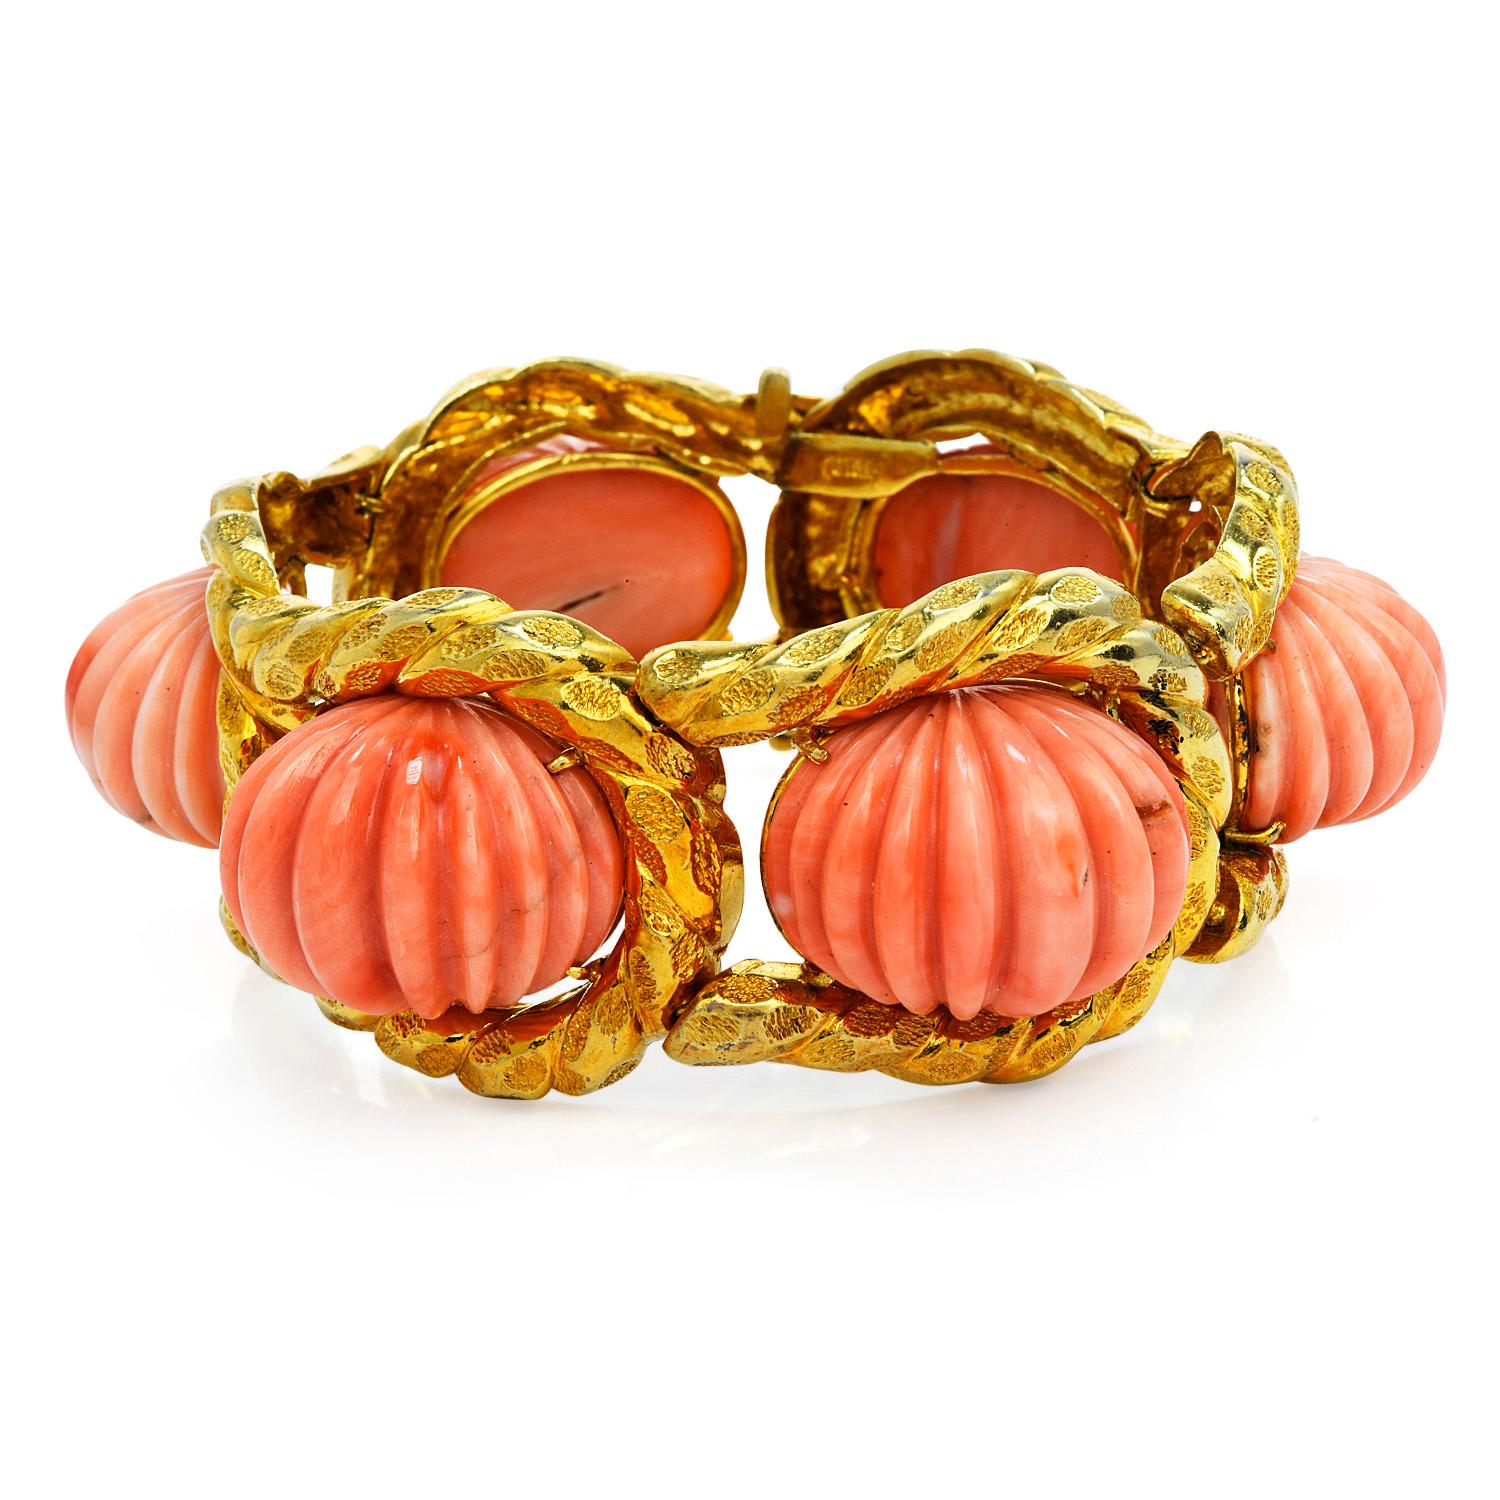 Out of the sea beauty in a prominent wide link bracelet.

exquisite textured design, on this vintage 1970's pink Carved coral & piece crafted in solid 18K yellow gold.
Centered by 6 genuine hand-carved cabochon oval genuine pink Coral, measuring 22